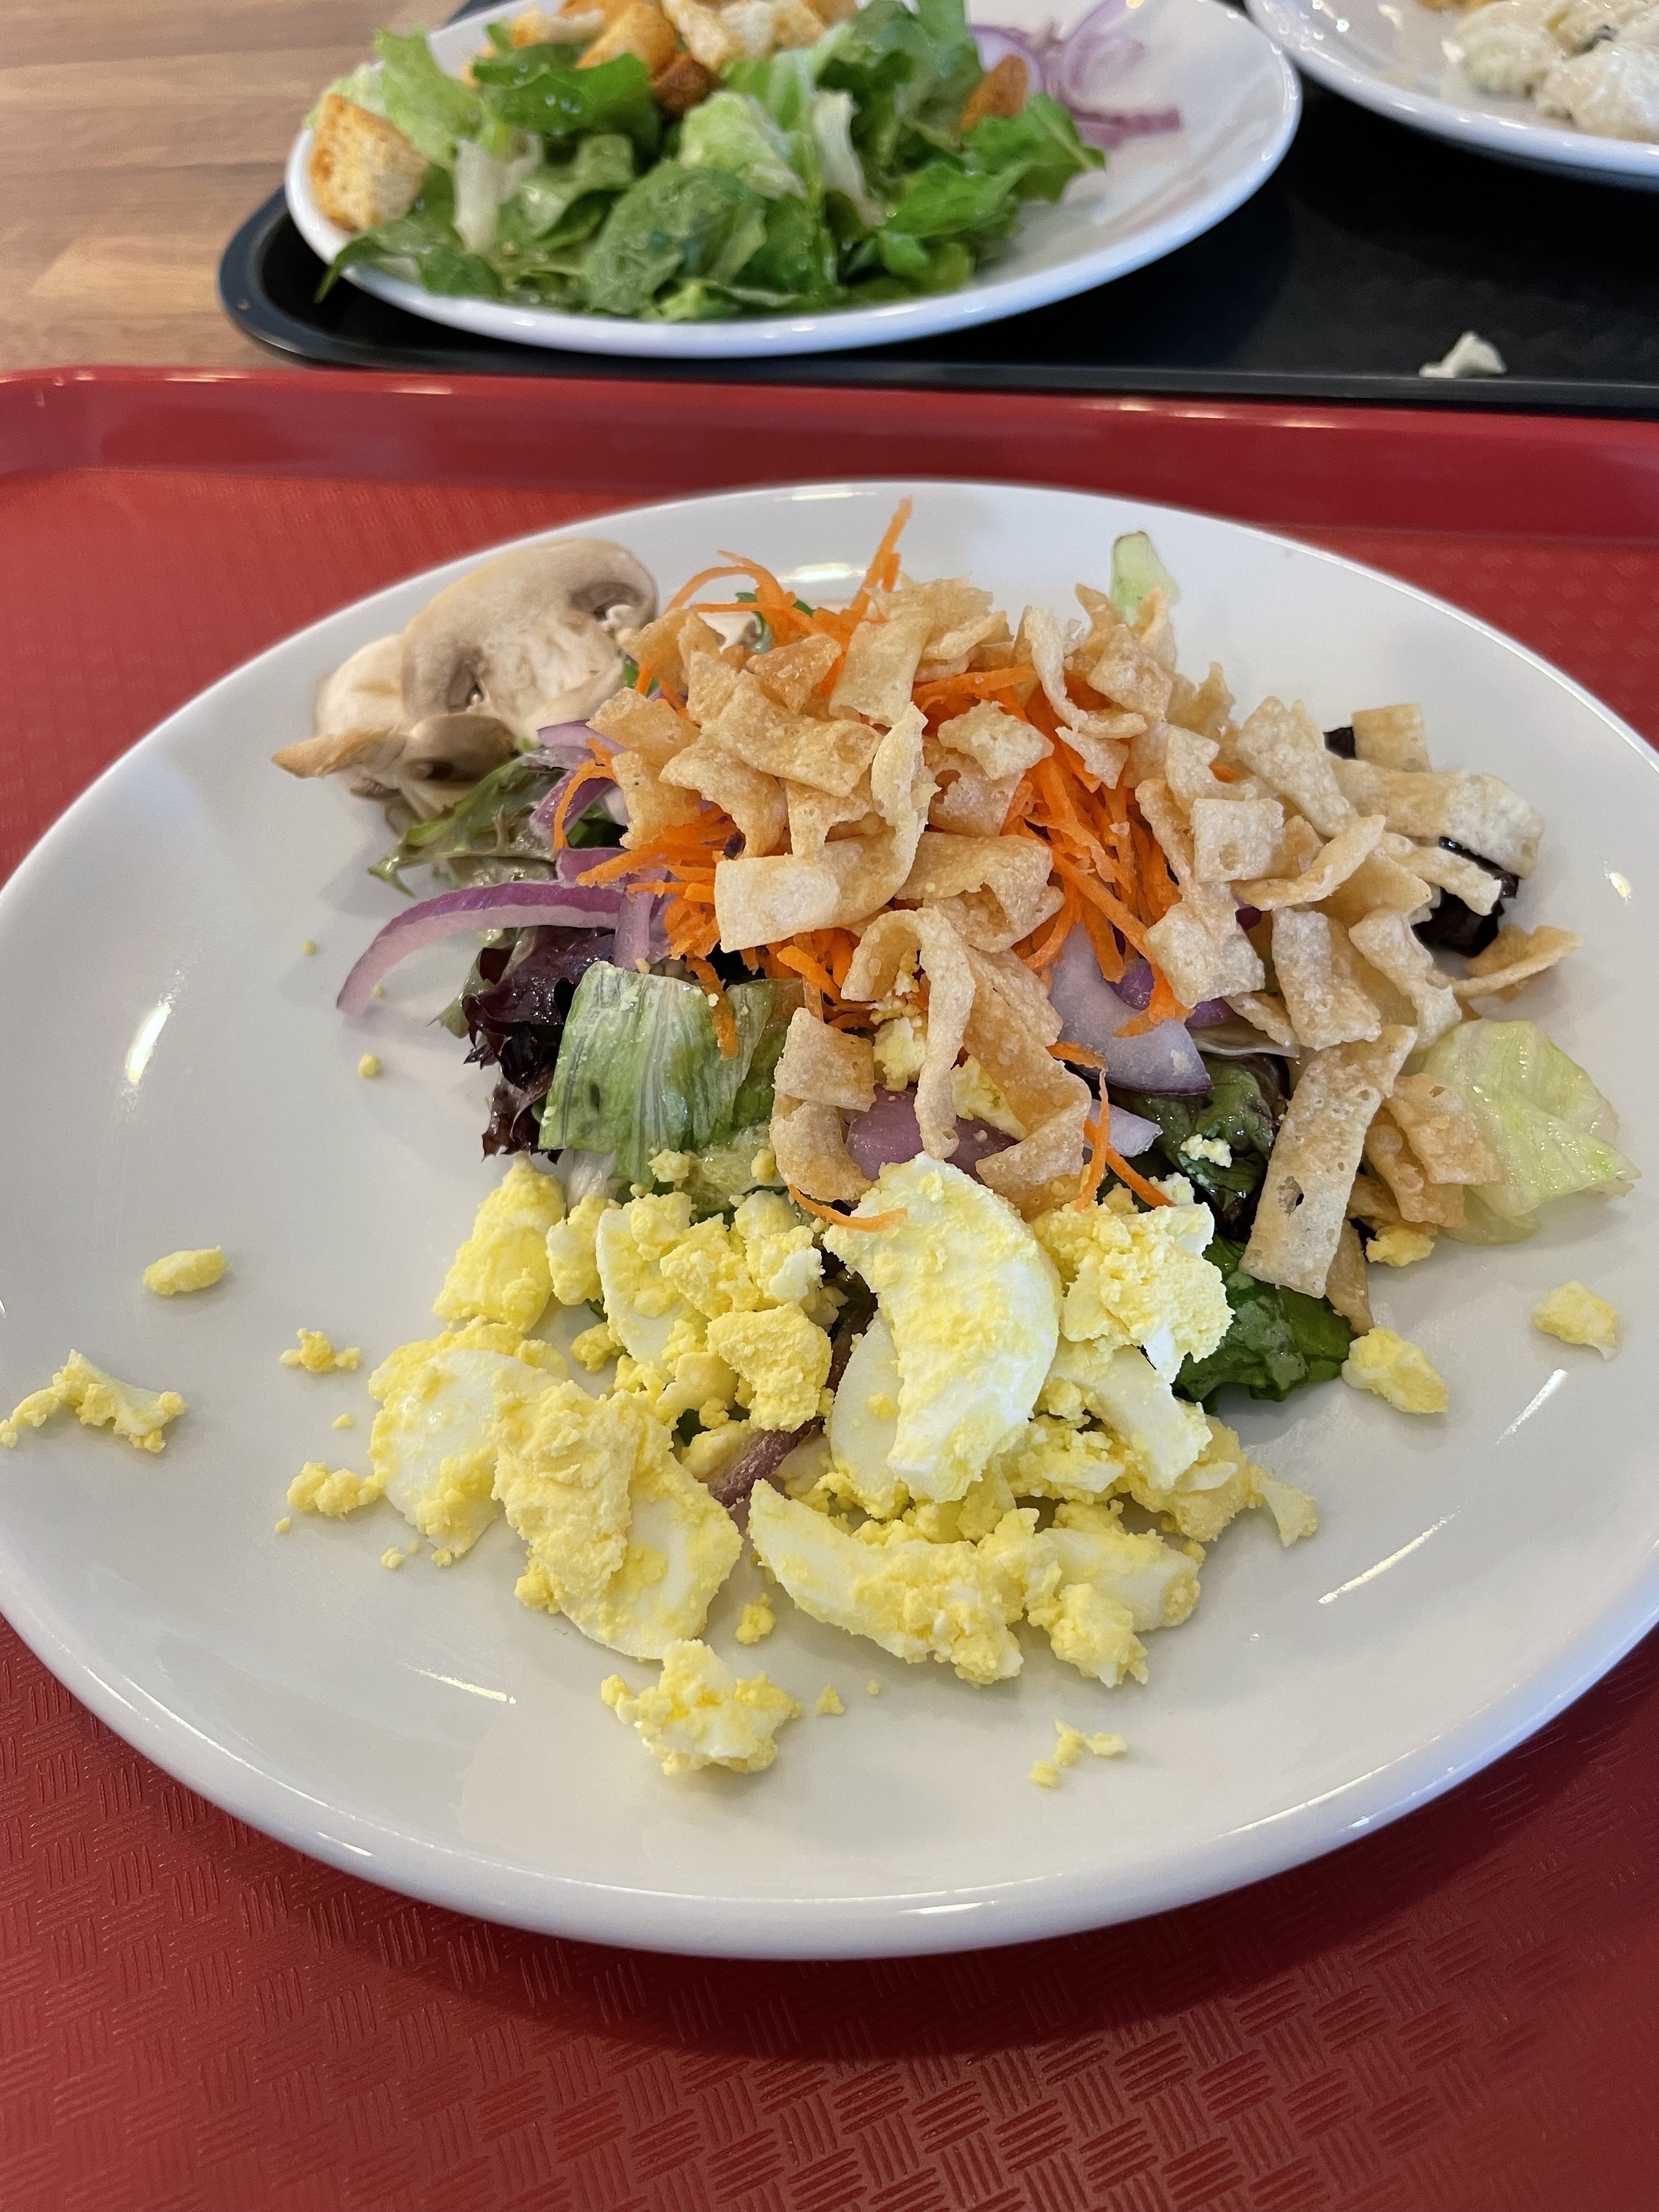 Plate of mixed salad topped with crumbled egg and crispy strips, on a dining table